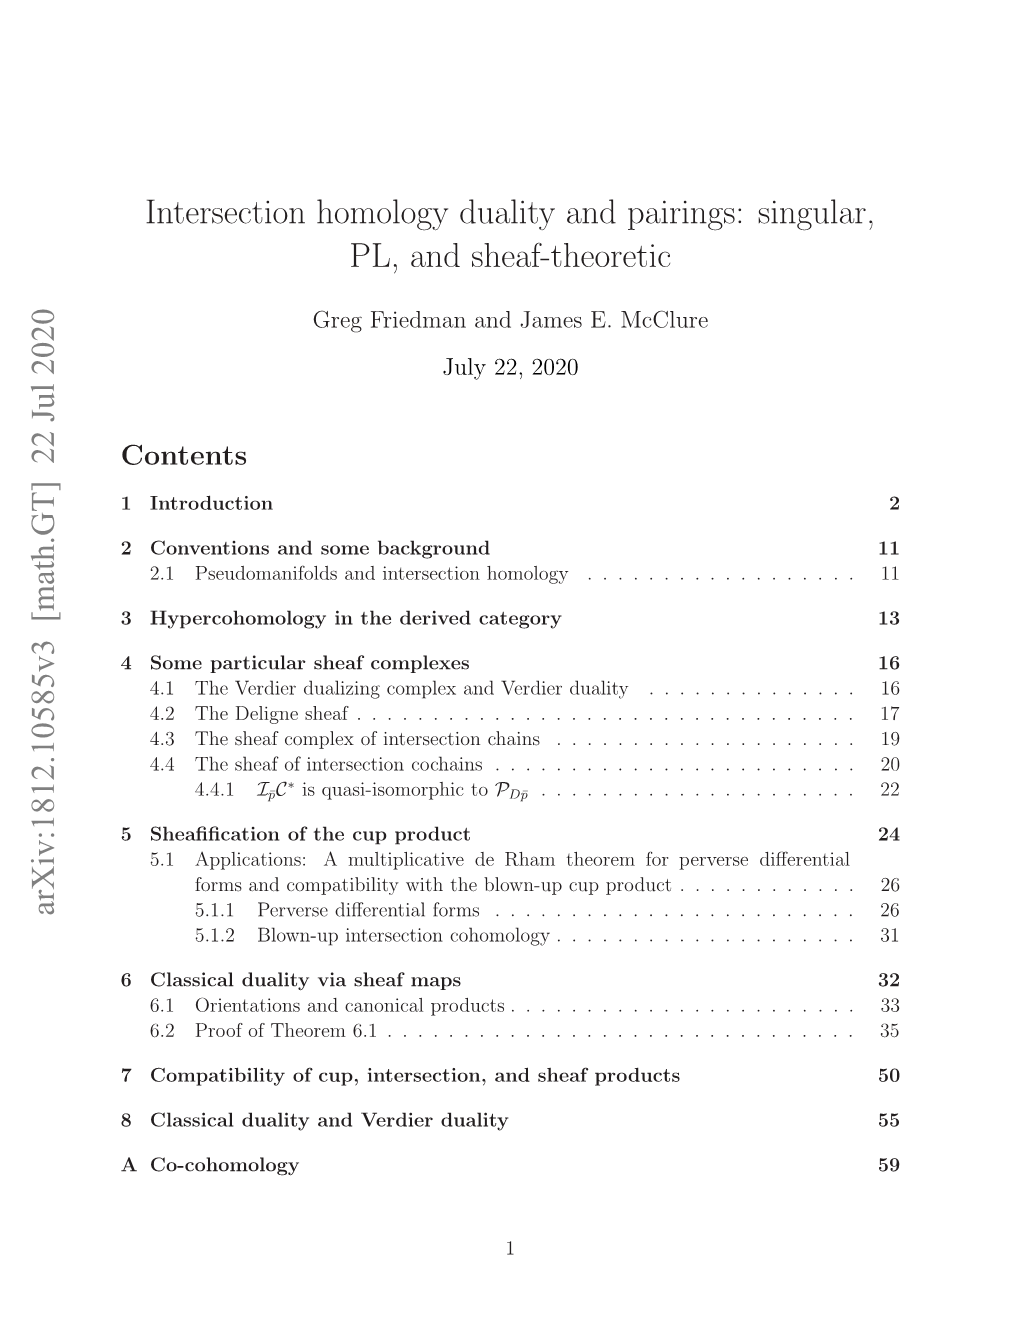 Intersection Homology Duality and Pairings: Singular, PL, and Sheaf